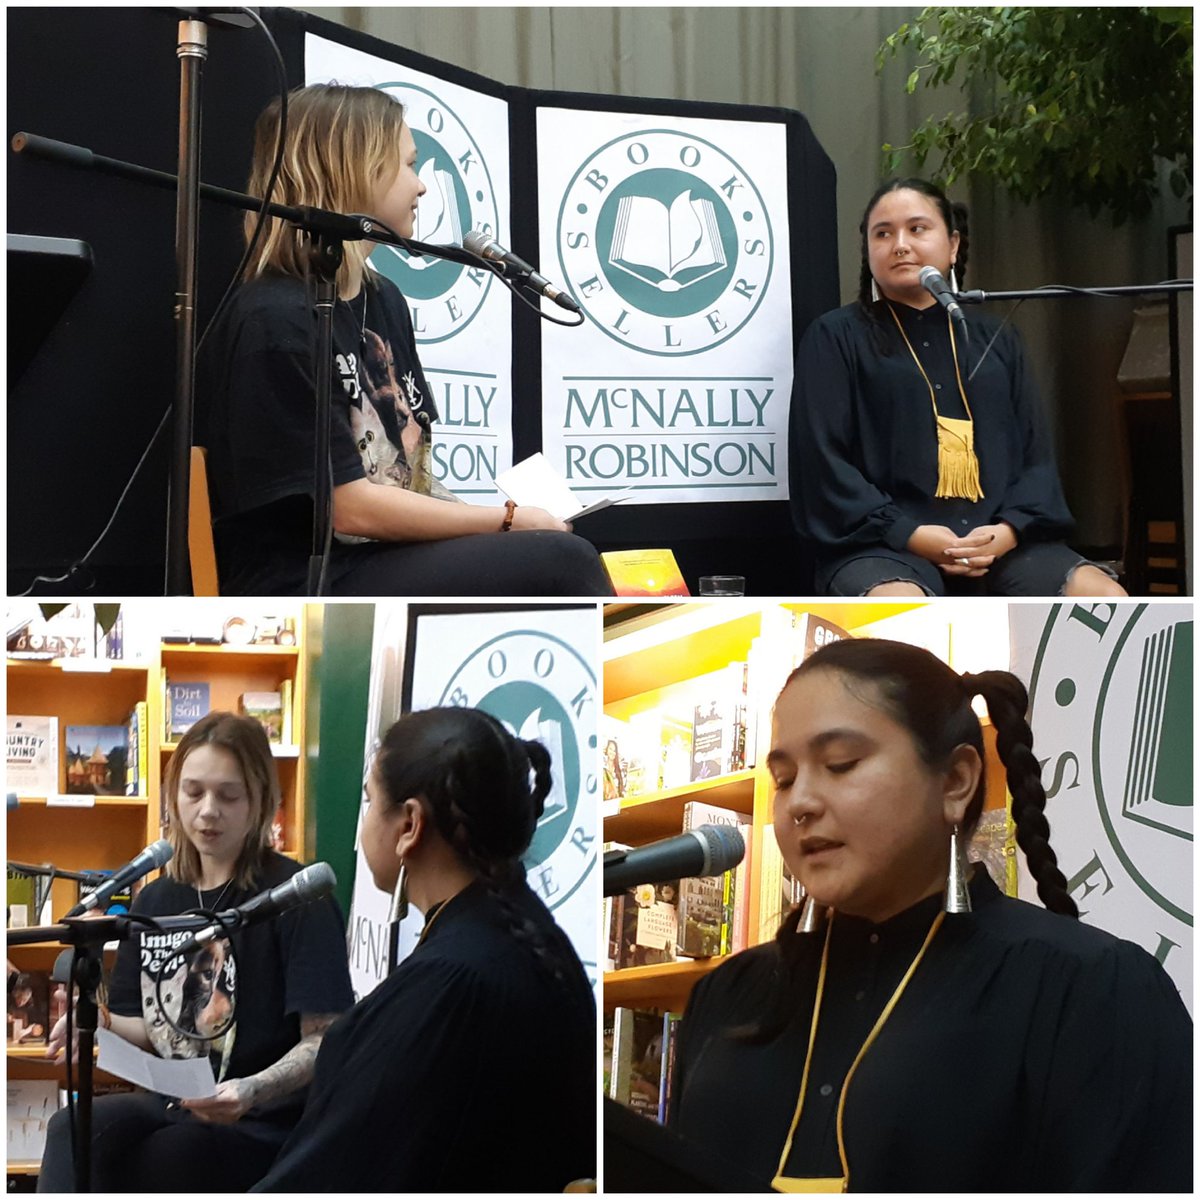 We were delighted to celebrate the Winnipeg launch of Brandi Bird's exceptional debut collection of poetry, The All + Flesh (@HouseofAnansi) last night. Host Hannah Green asked Bird questions about the collection following their reading. Thanks to all who came out!